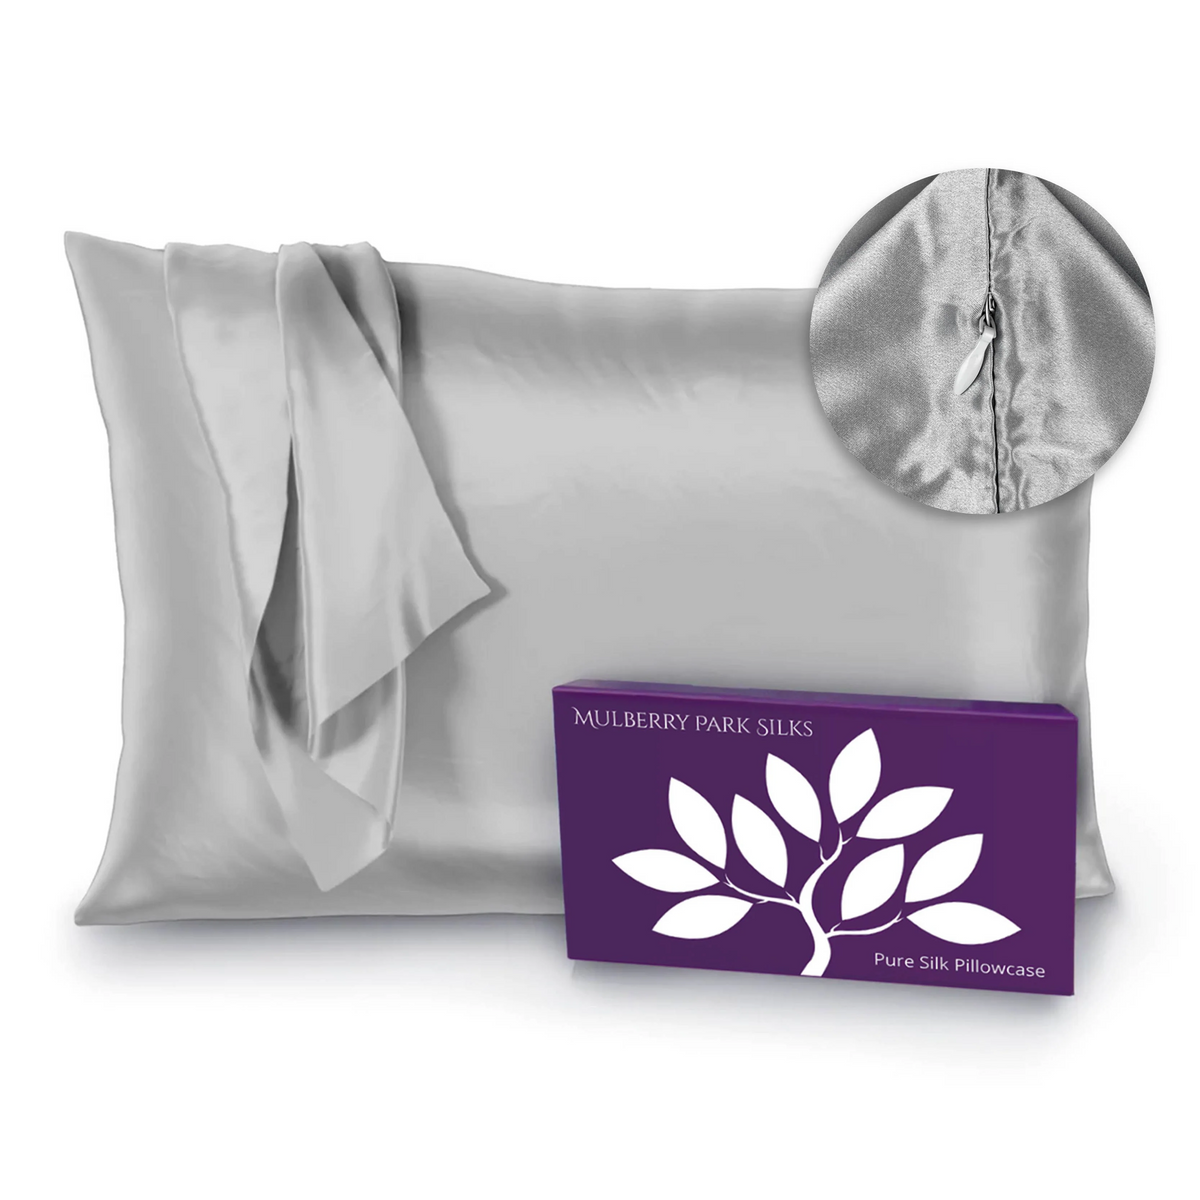 Silver Silo Image of Mulberry Park Silks Deluxe 22 Momme Pure Silk Pillowcase with Zipper Detail and Box